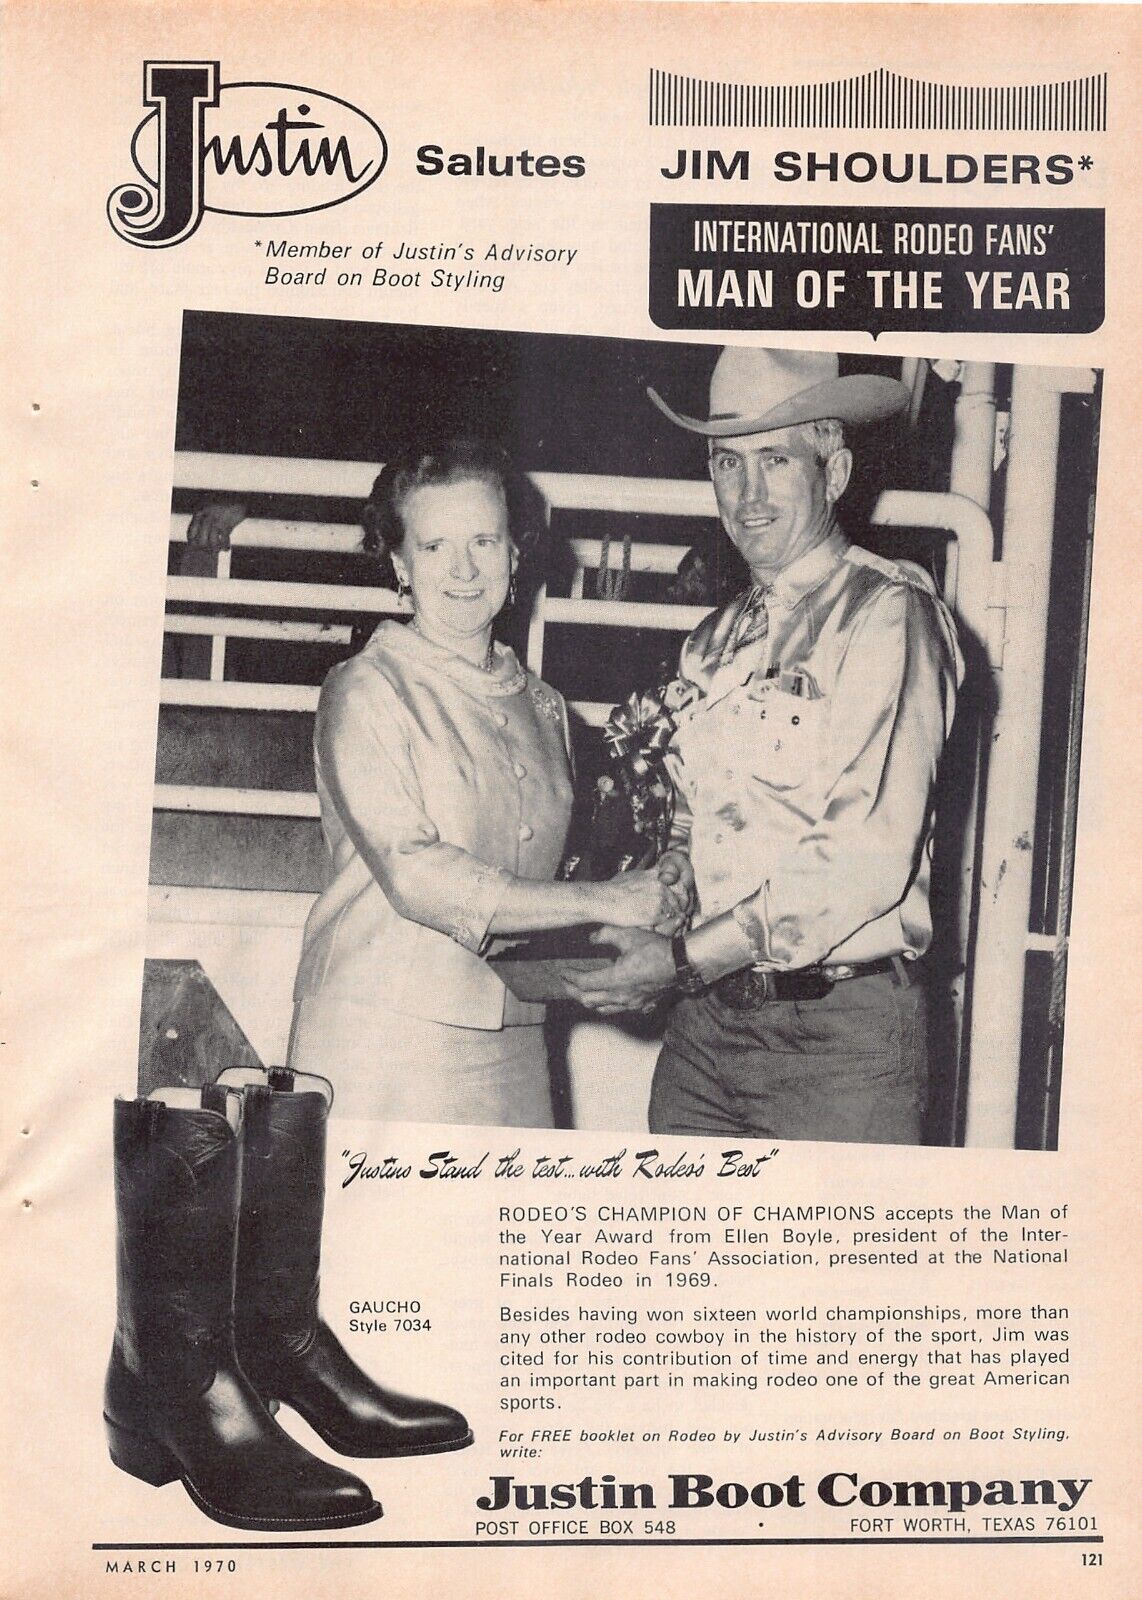 Jim Shoulders Rodeo Fans Man Of The Year Justin Boot Company Vintage Print Ad